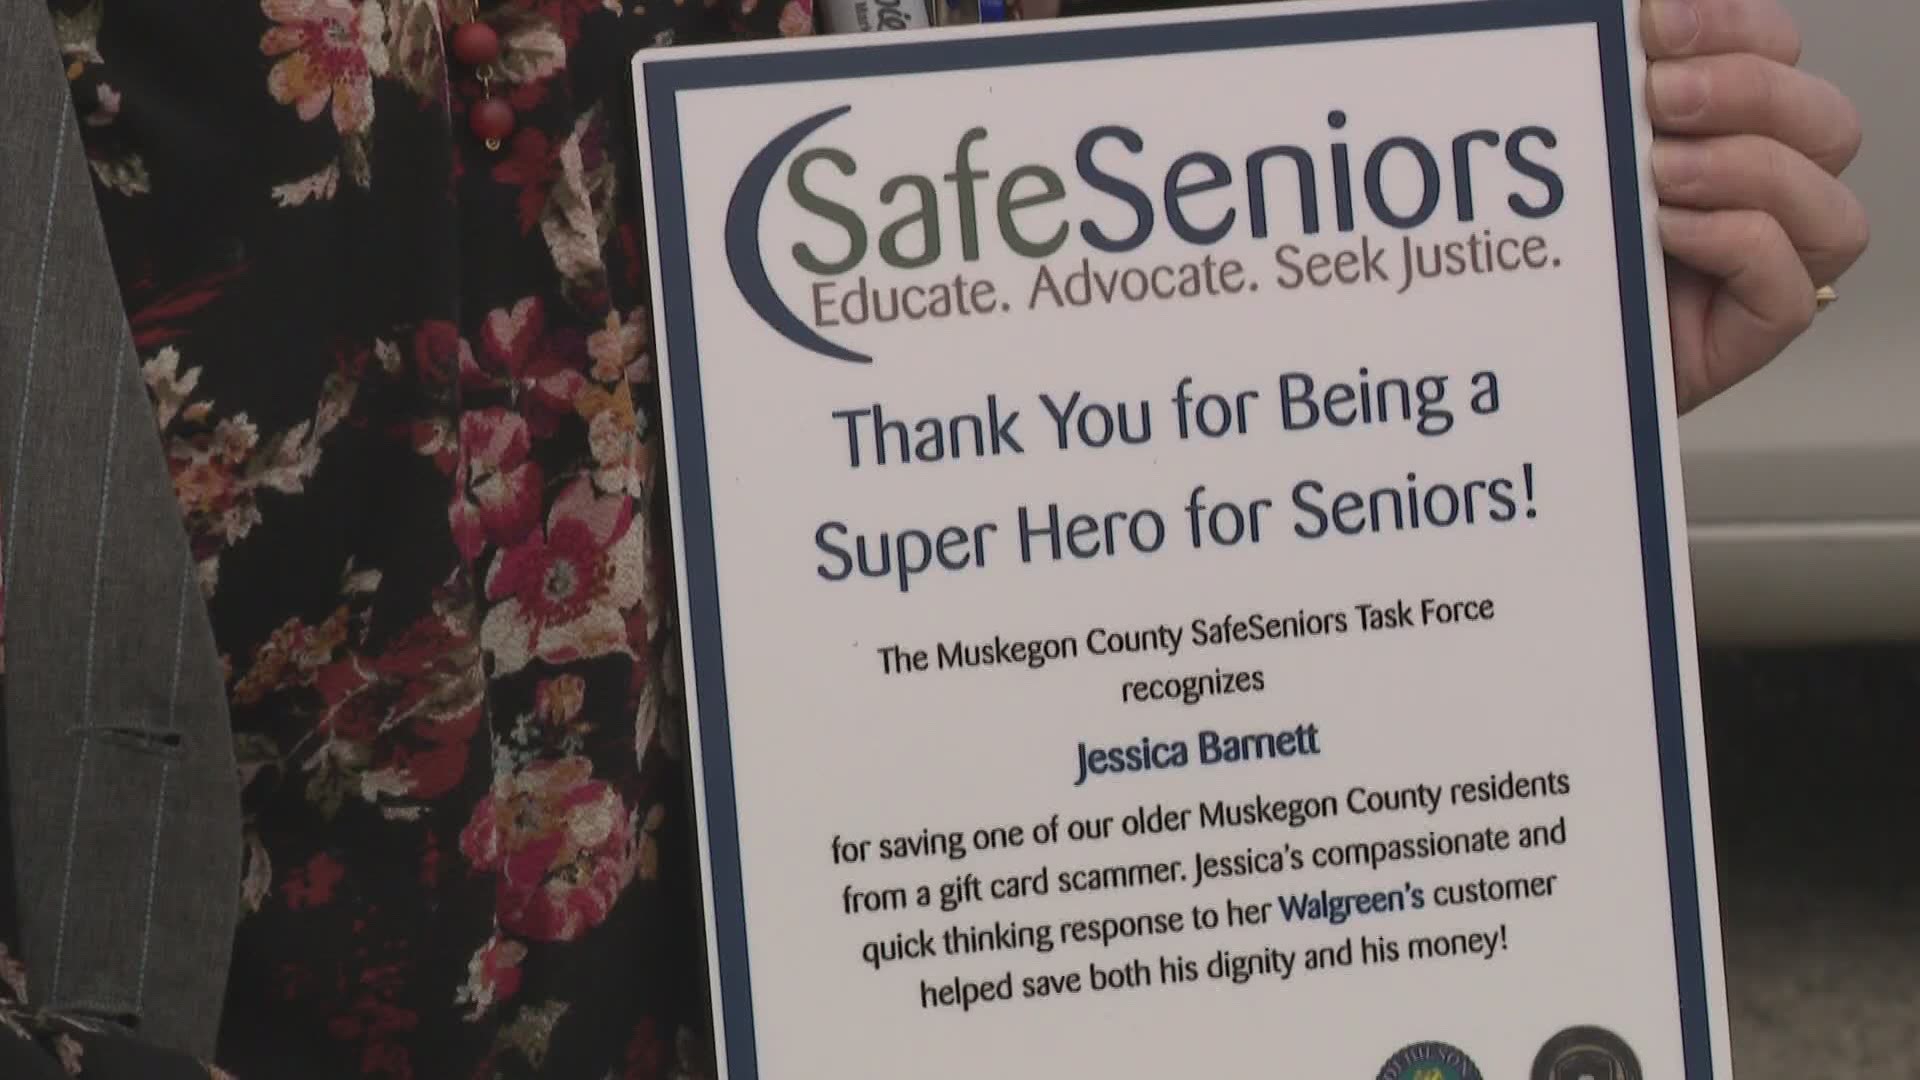 A new task force in Muskegon County is targeting thieves who prey on older adults and is honoring the people who protect seniors from scams.